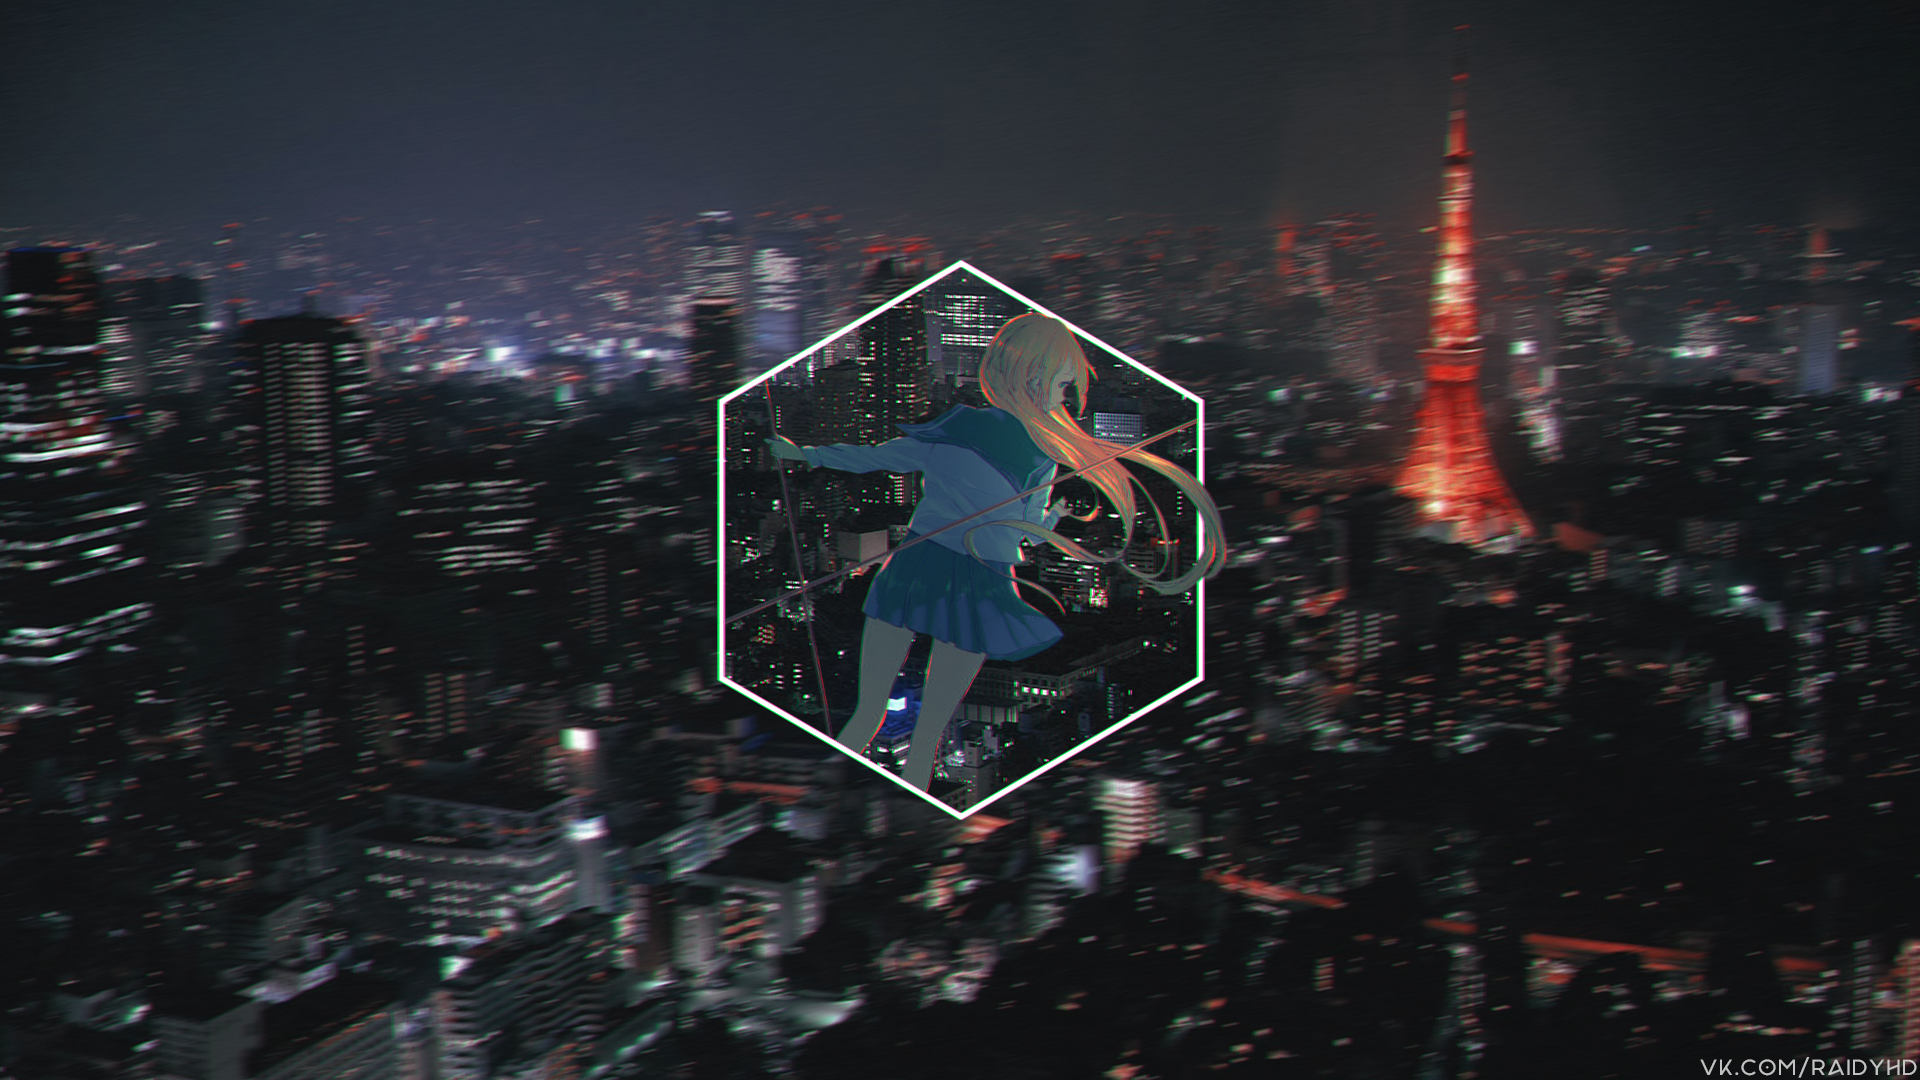 Wallpaper / Anime, Anime Girls, Picture In Picture, Night, City, Tokyo Free Download